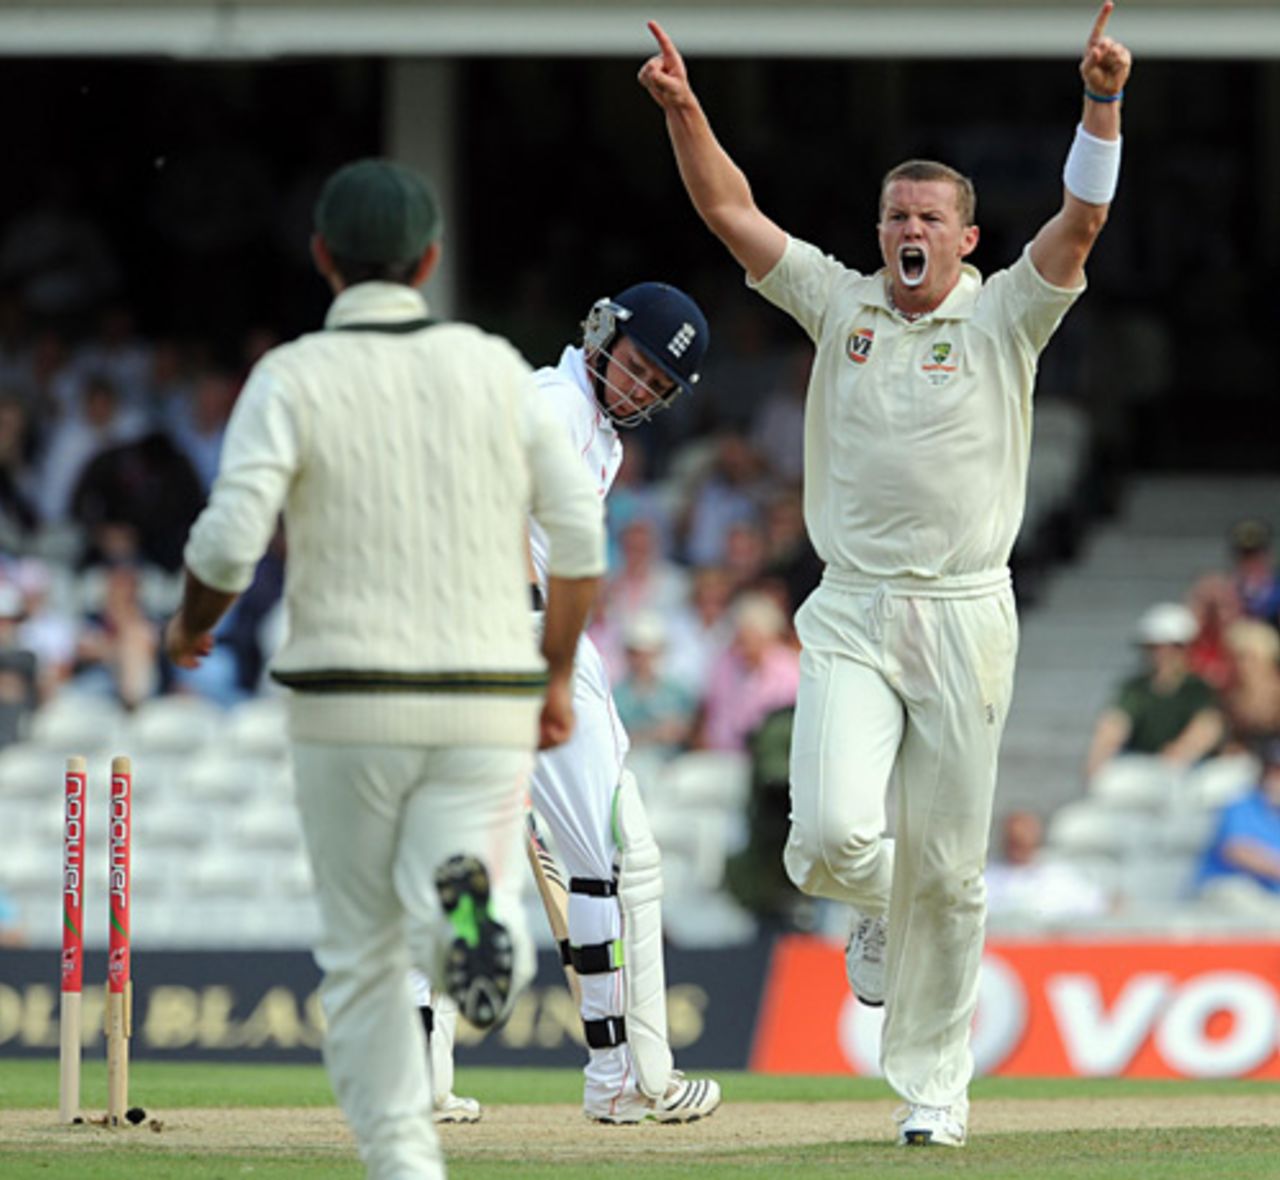 Peter Siddle takes his third wicket as Ian Bell finds two of his stumps left standing, England v Australia, 5th Test, The Oval, 1st day, August 20, 2009